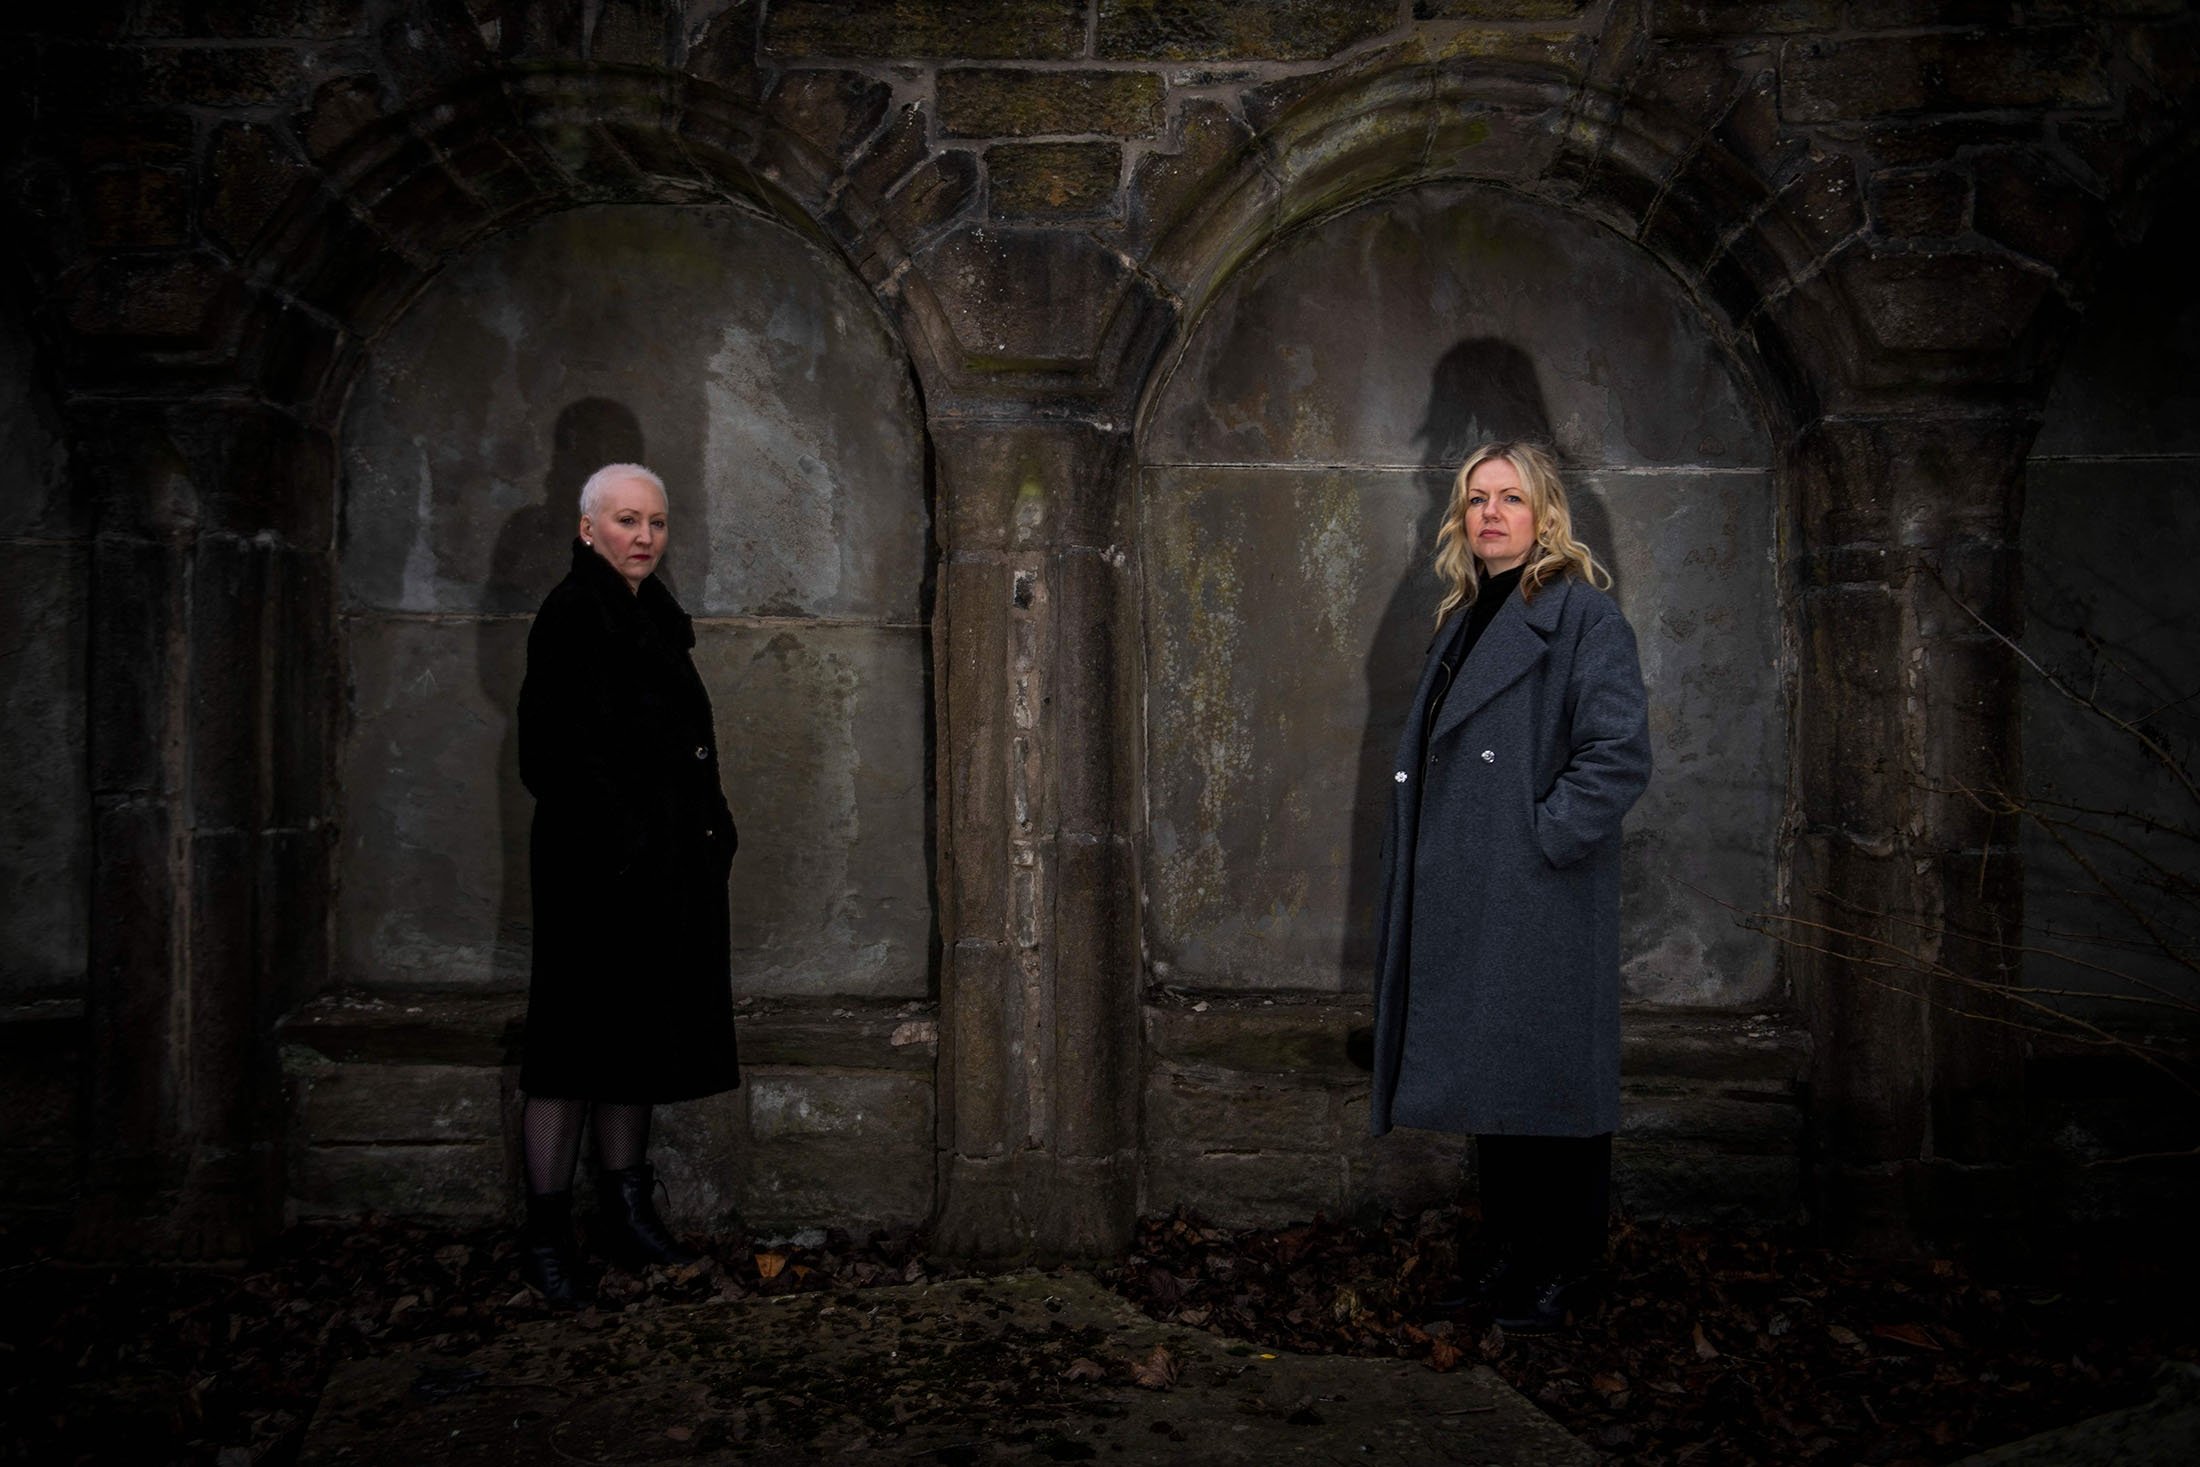 Founder of the association "Witches of Scotland" Claire Mitchell (R) and member Zoe Venditozzi pose for pictures in the Howff Cemetery in Dundee, Scotland, Jan. 30, 2022. (AFP Photo)